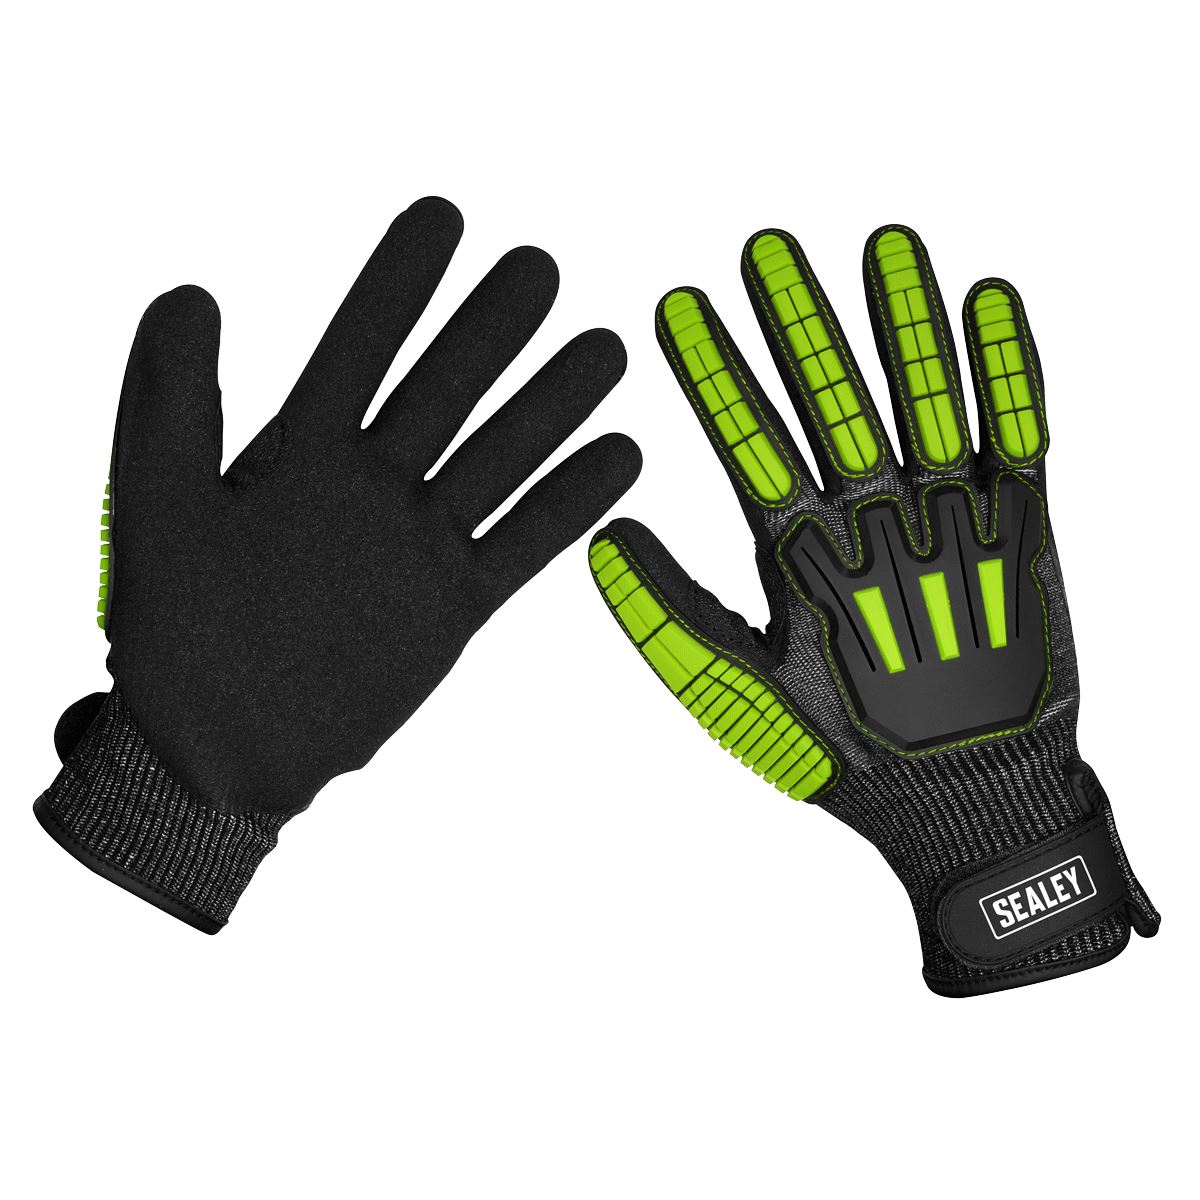 Sealey Cut & Impact Resistant Gloves - Large - Pair